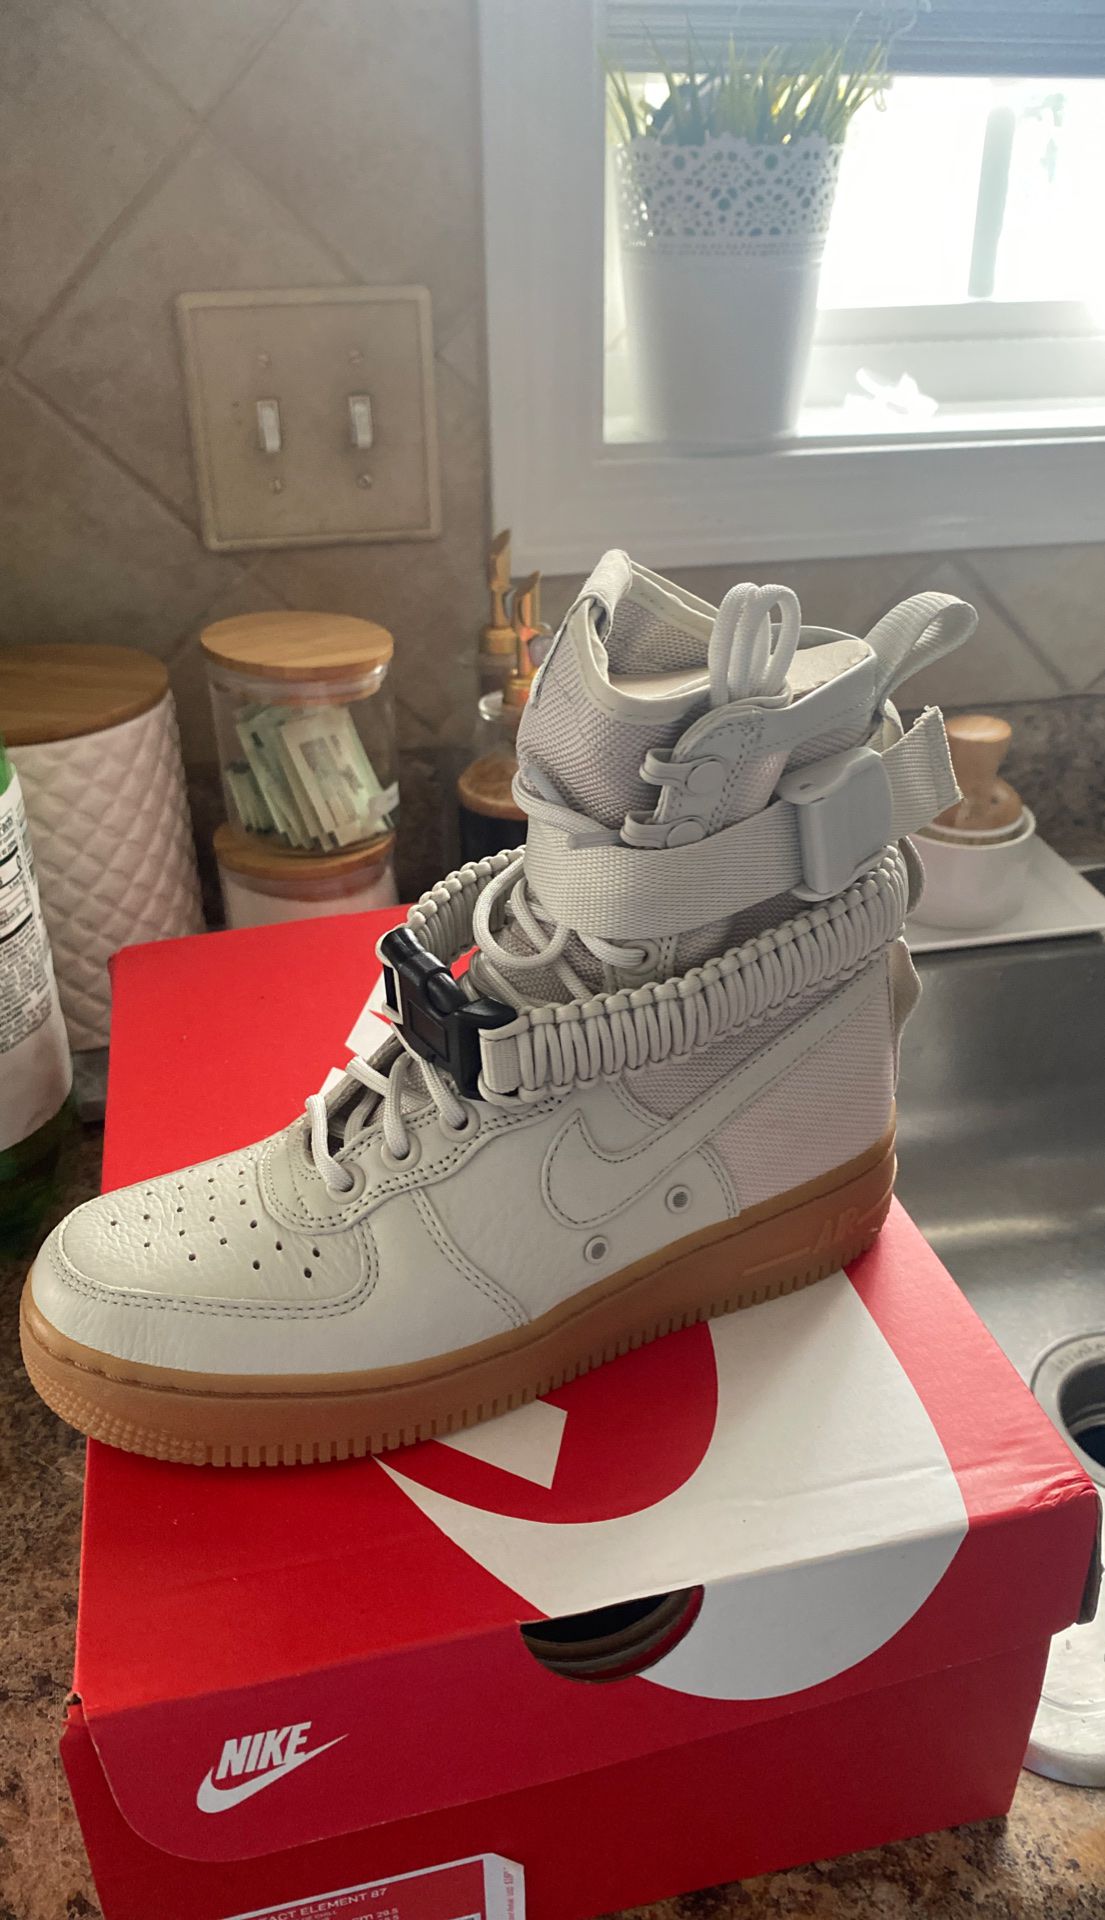 Nike Women's SF AF1 Casual Shoe size 6